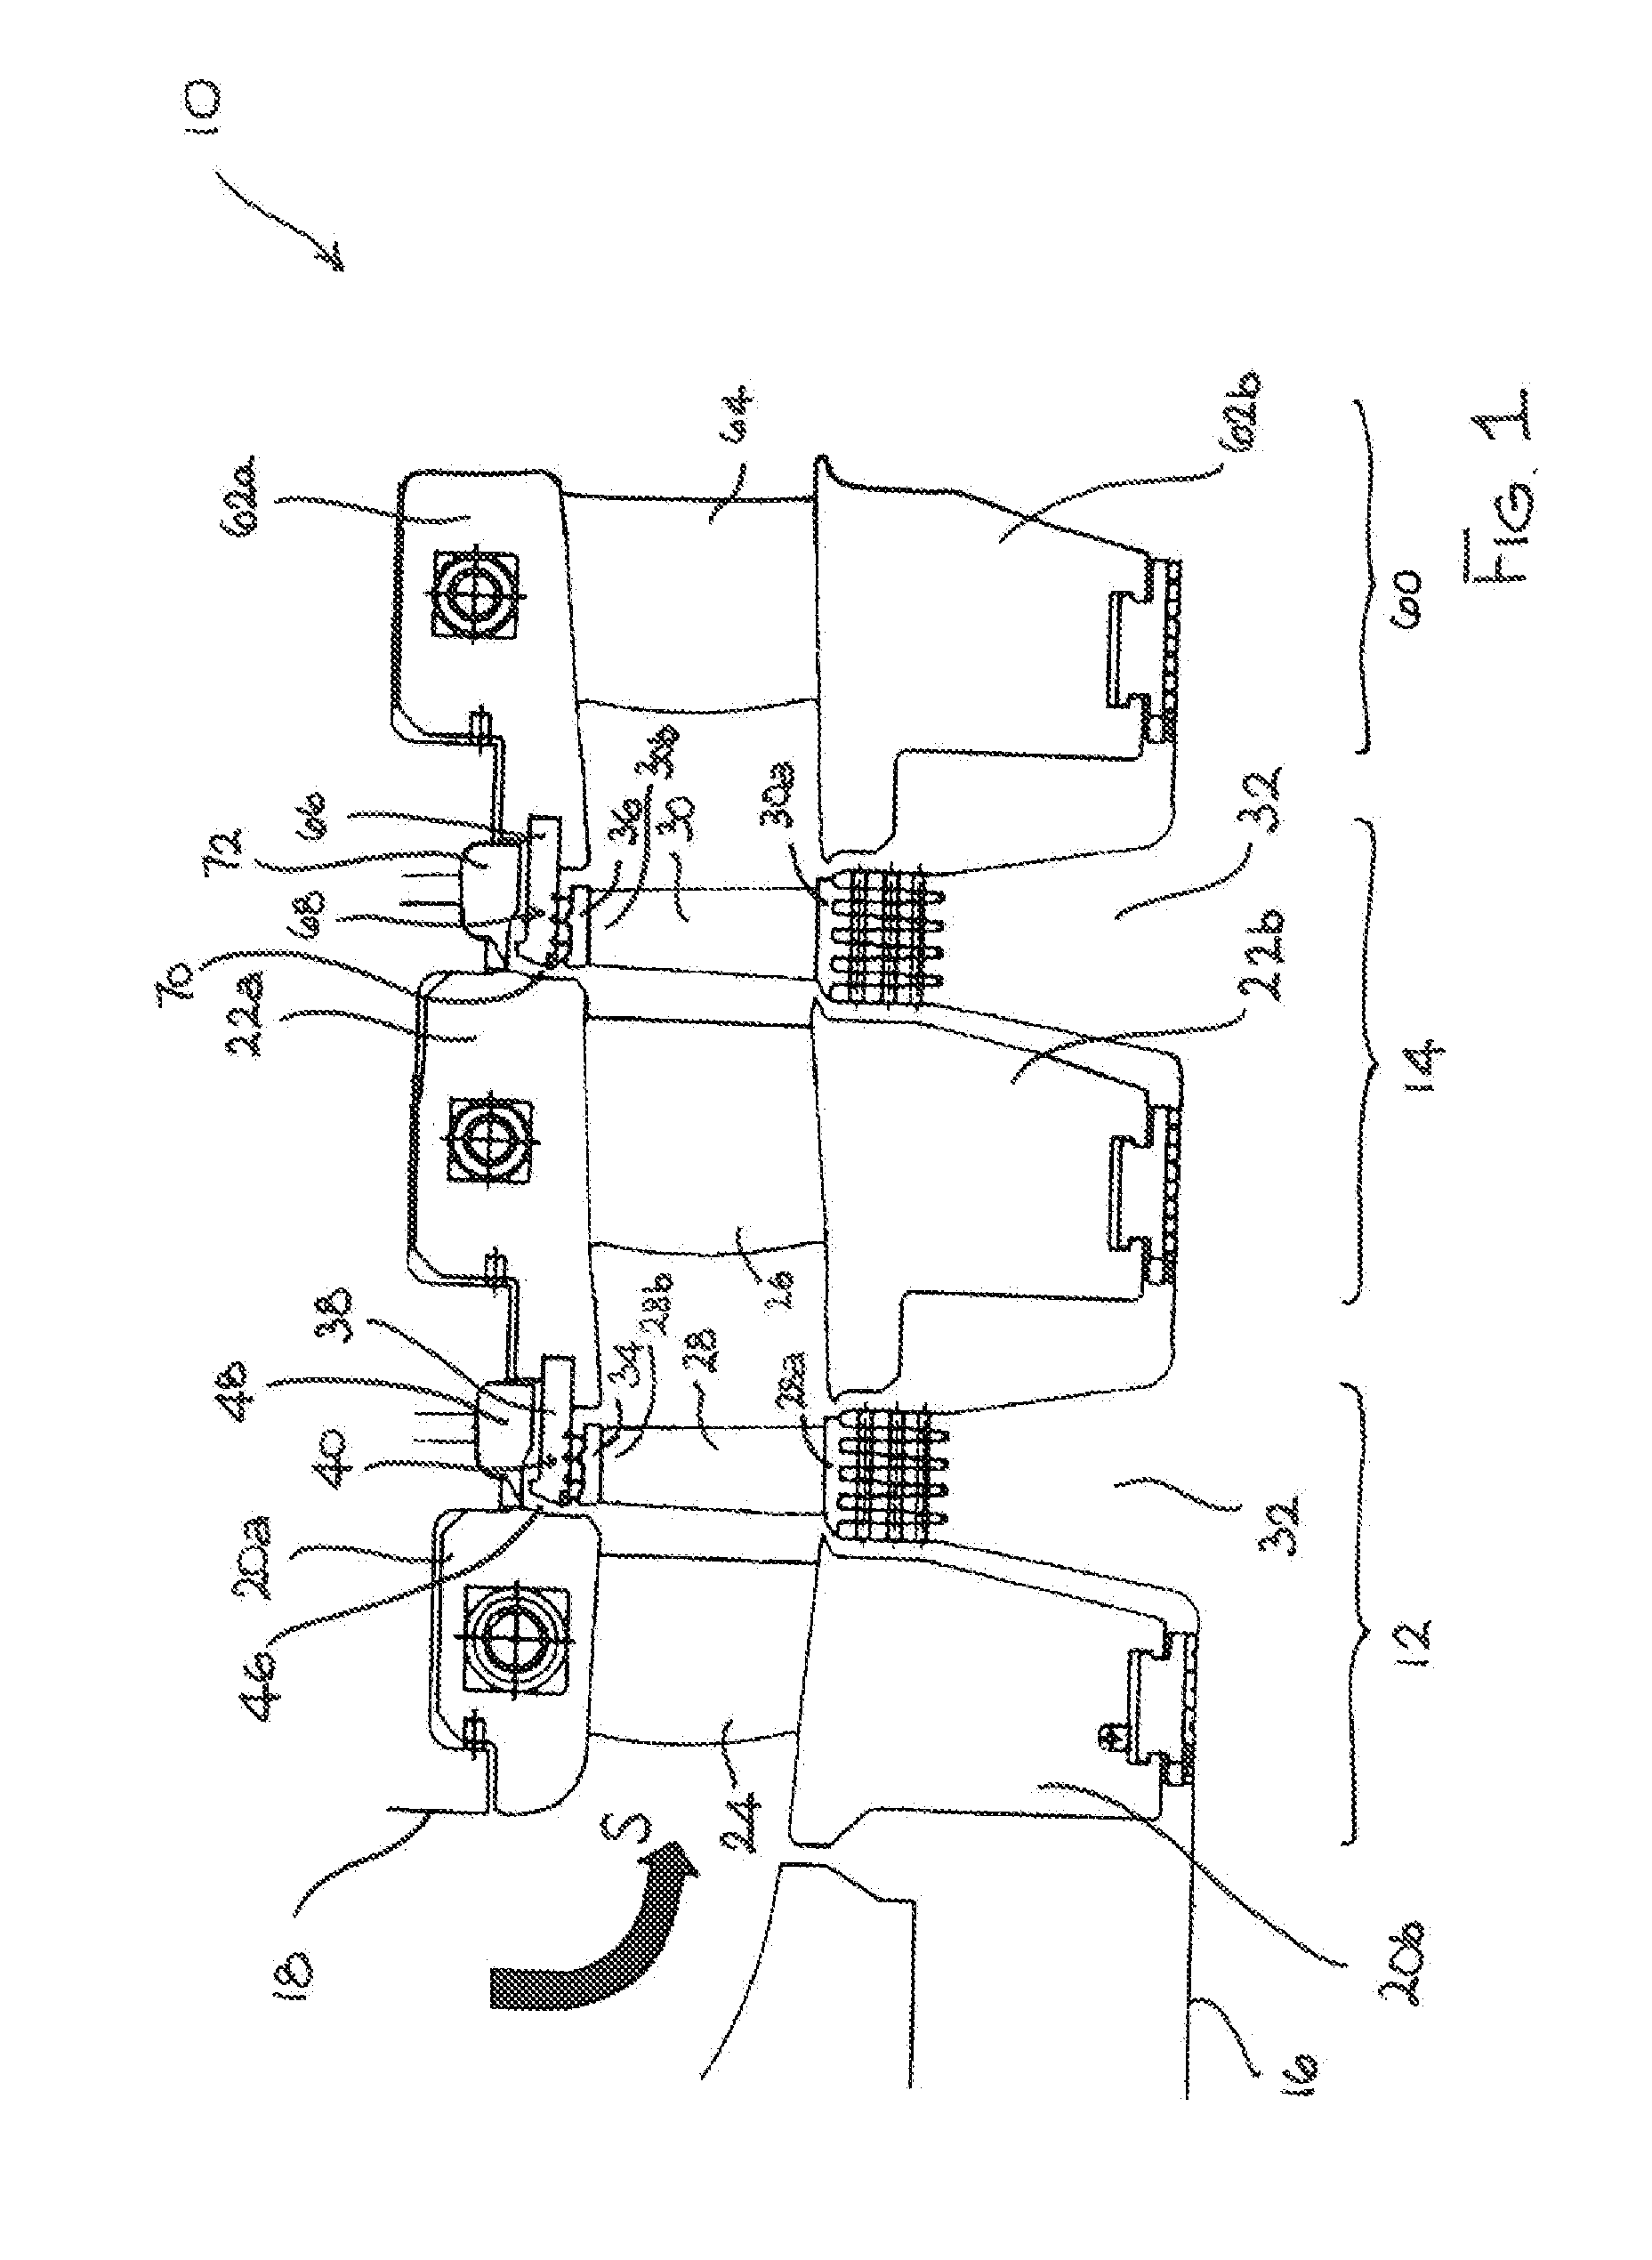 Solid particle diversion in an axial flow steam turbine